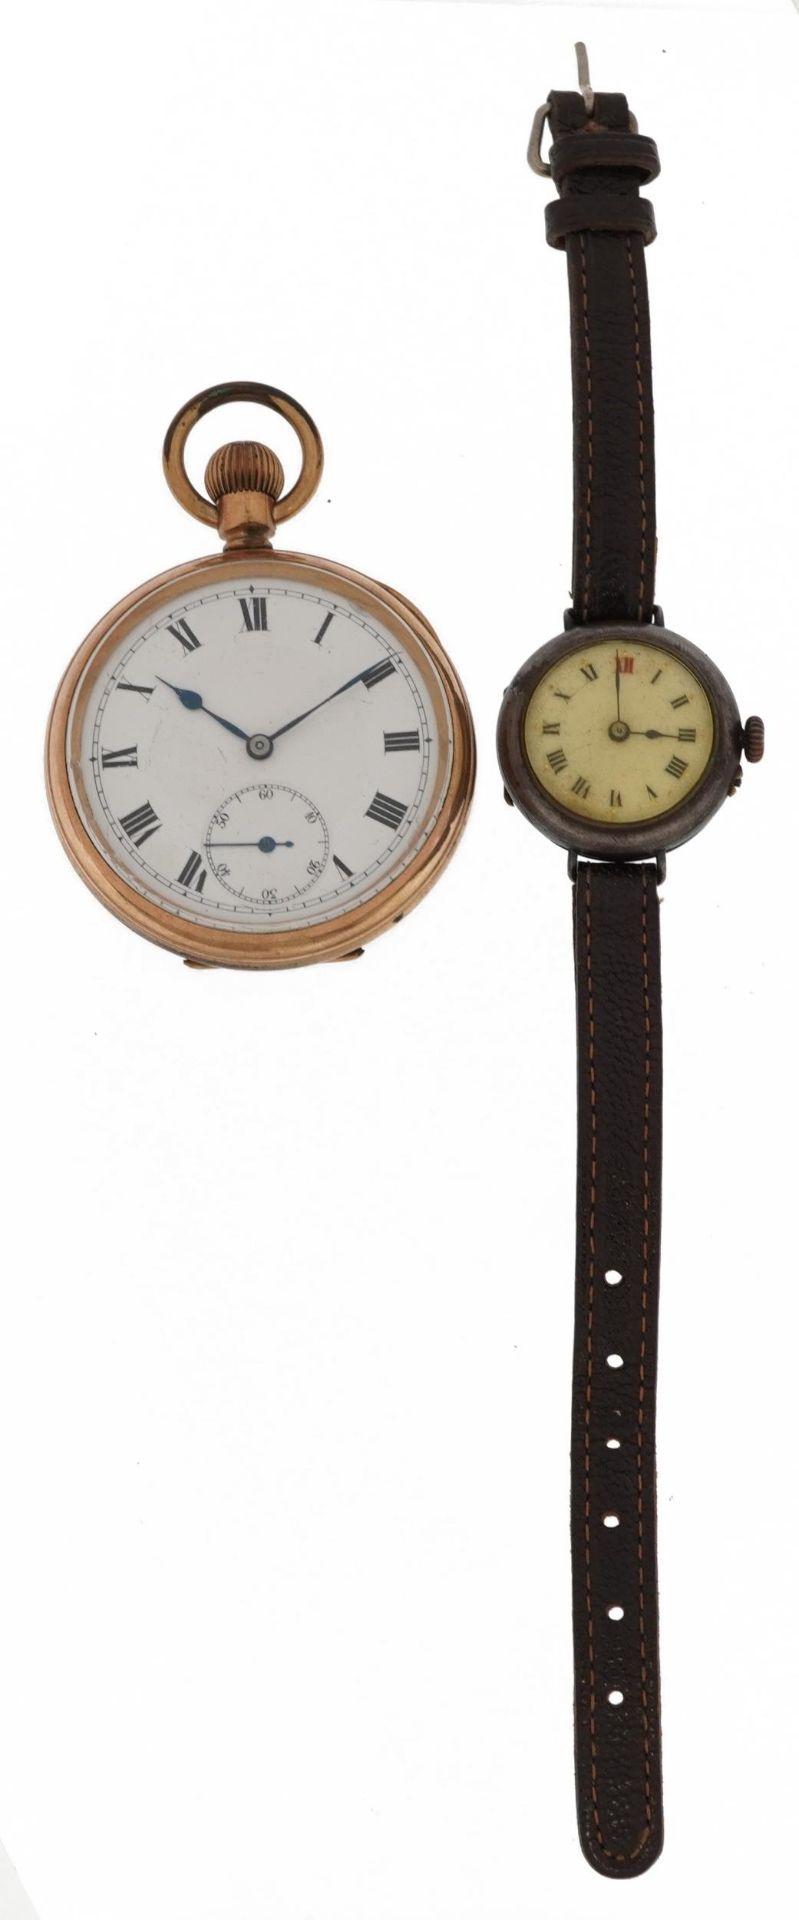 Gentlemen's military interest trench watch with enamelled dial and yellow metal American Amrok - Image 2 of 5